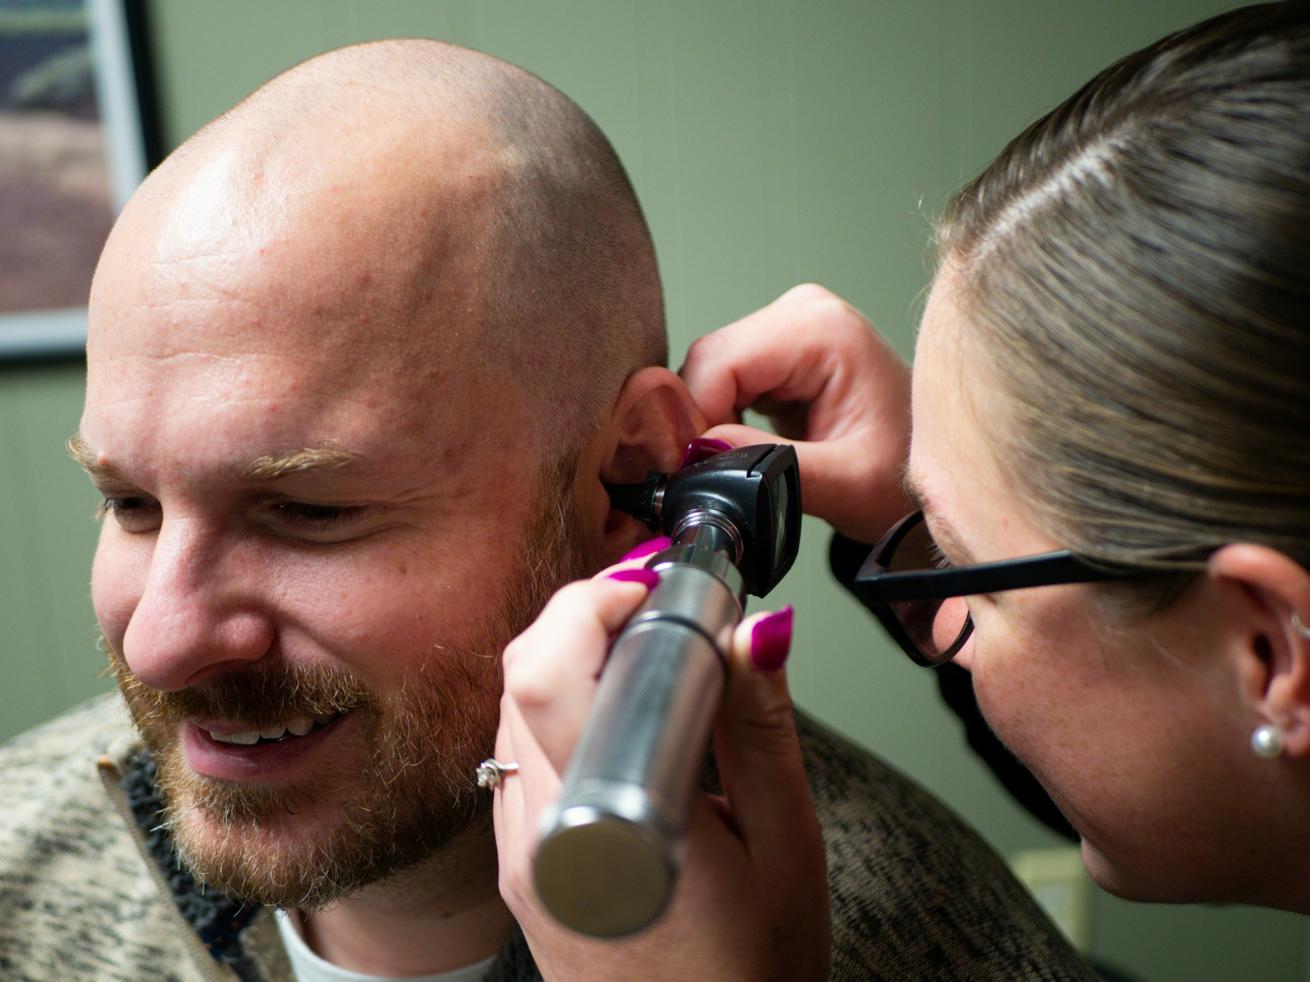 An audiologist tests a man’s hearing